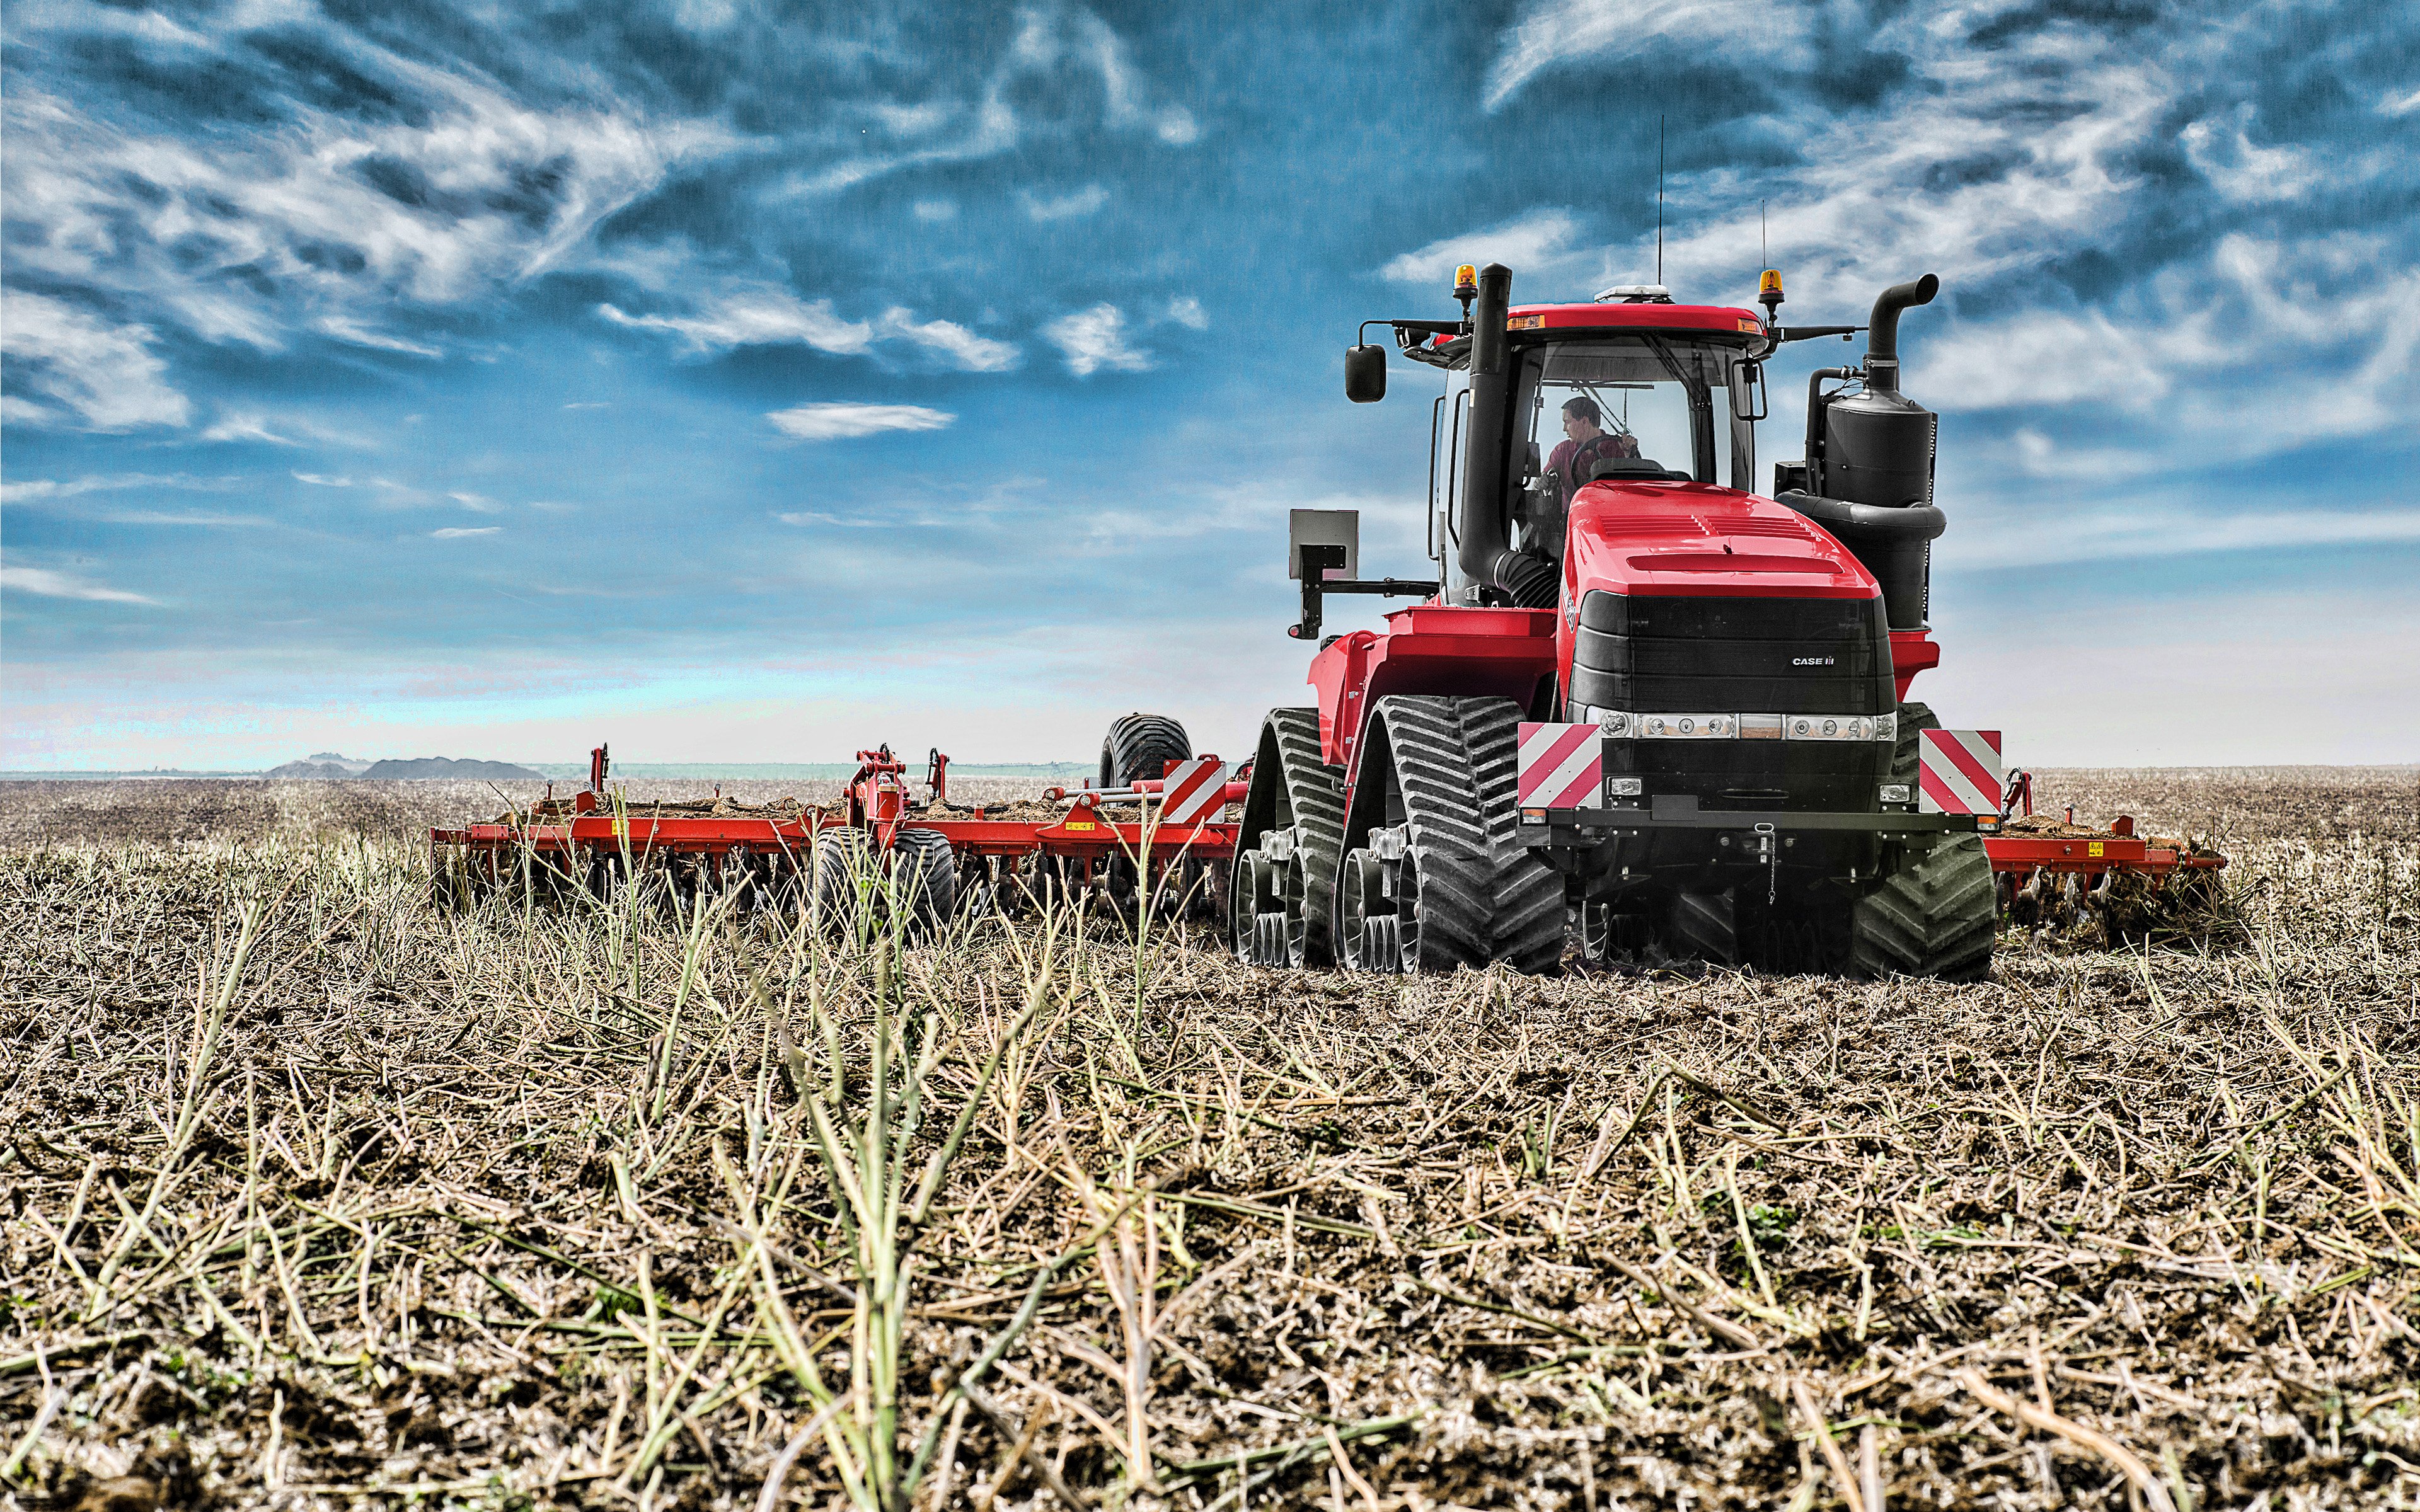 Download wallpaper Case IH Quadtrac 4k, plowing field, 2019 tractors, crawler, agricultural machinery, HDR, agriculture, harvest, tractor in the field, Case for desktop with resolution 3840x2400. High Quality HD picture wallpaper